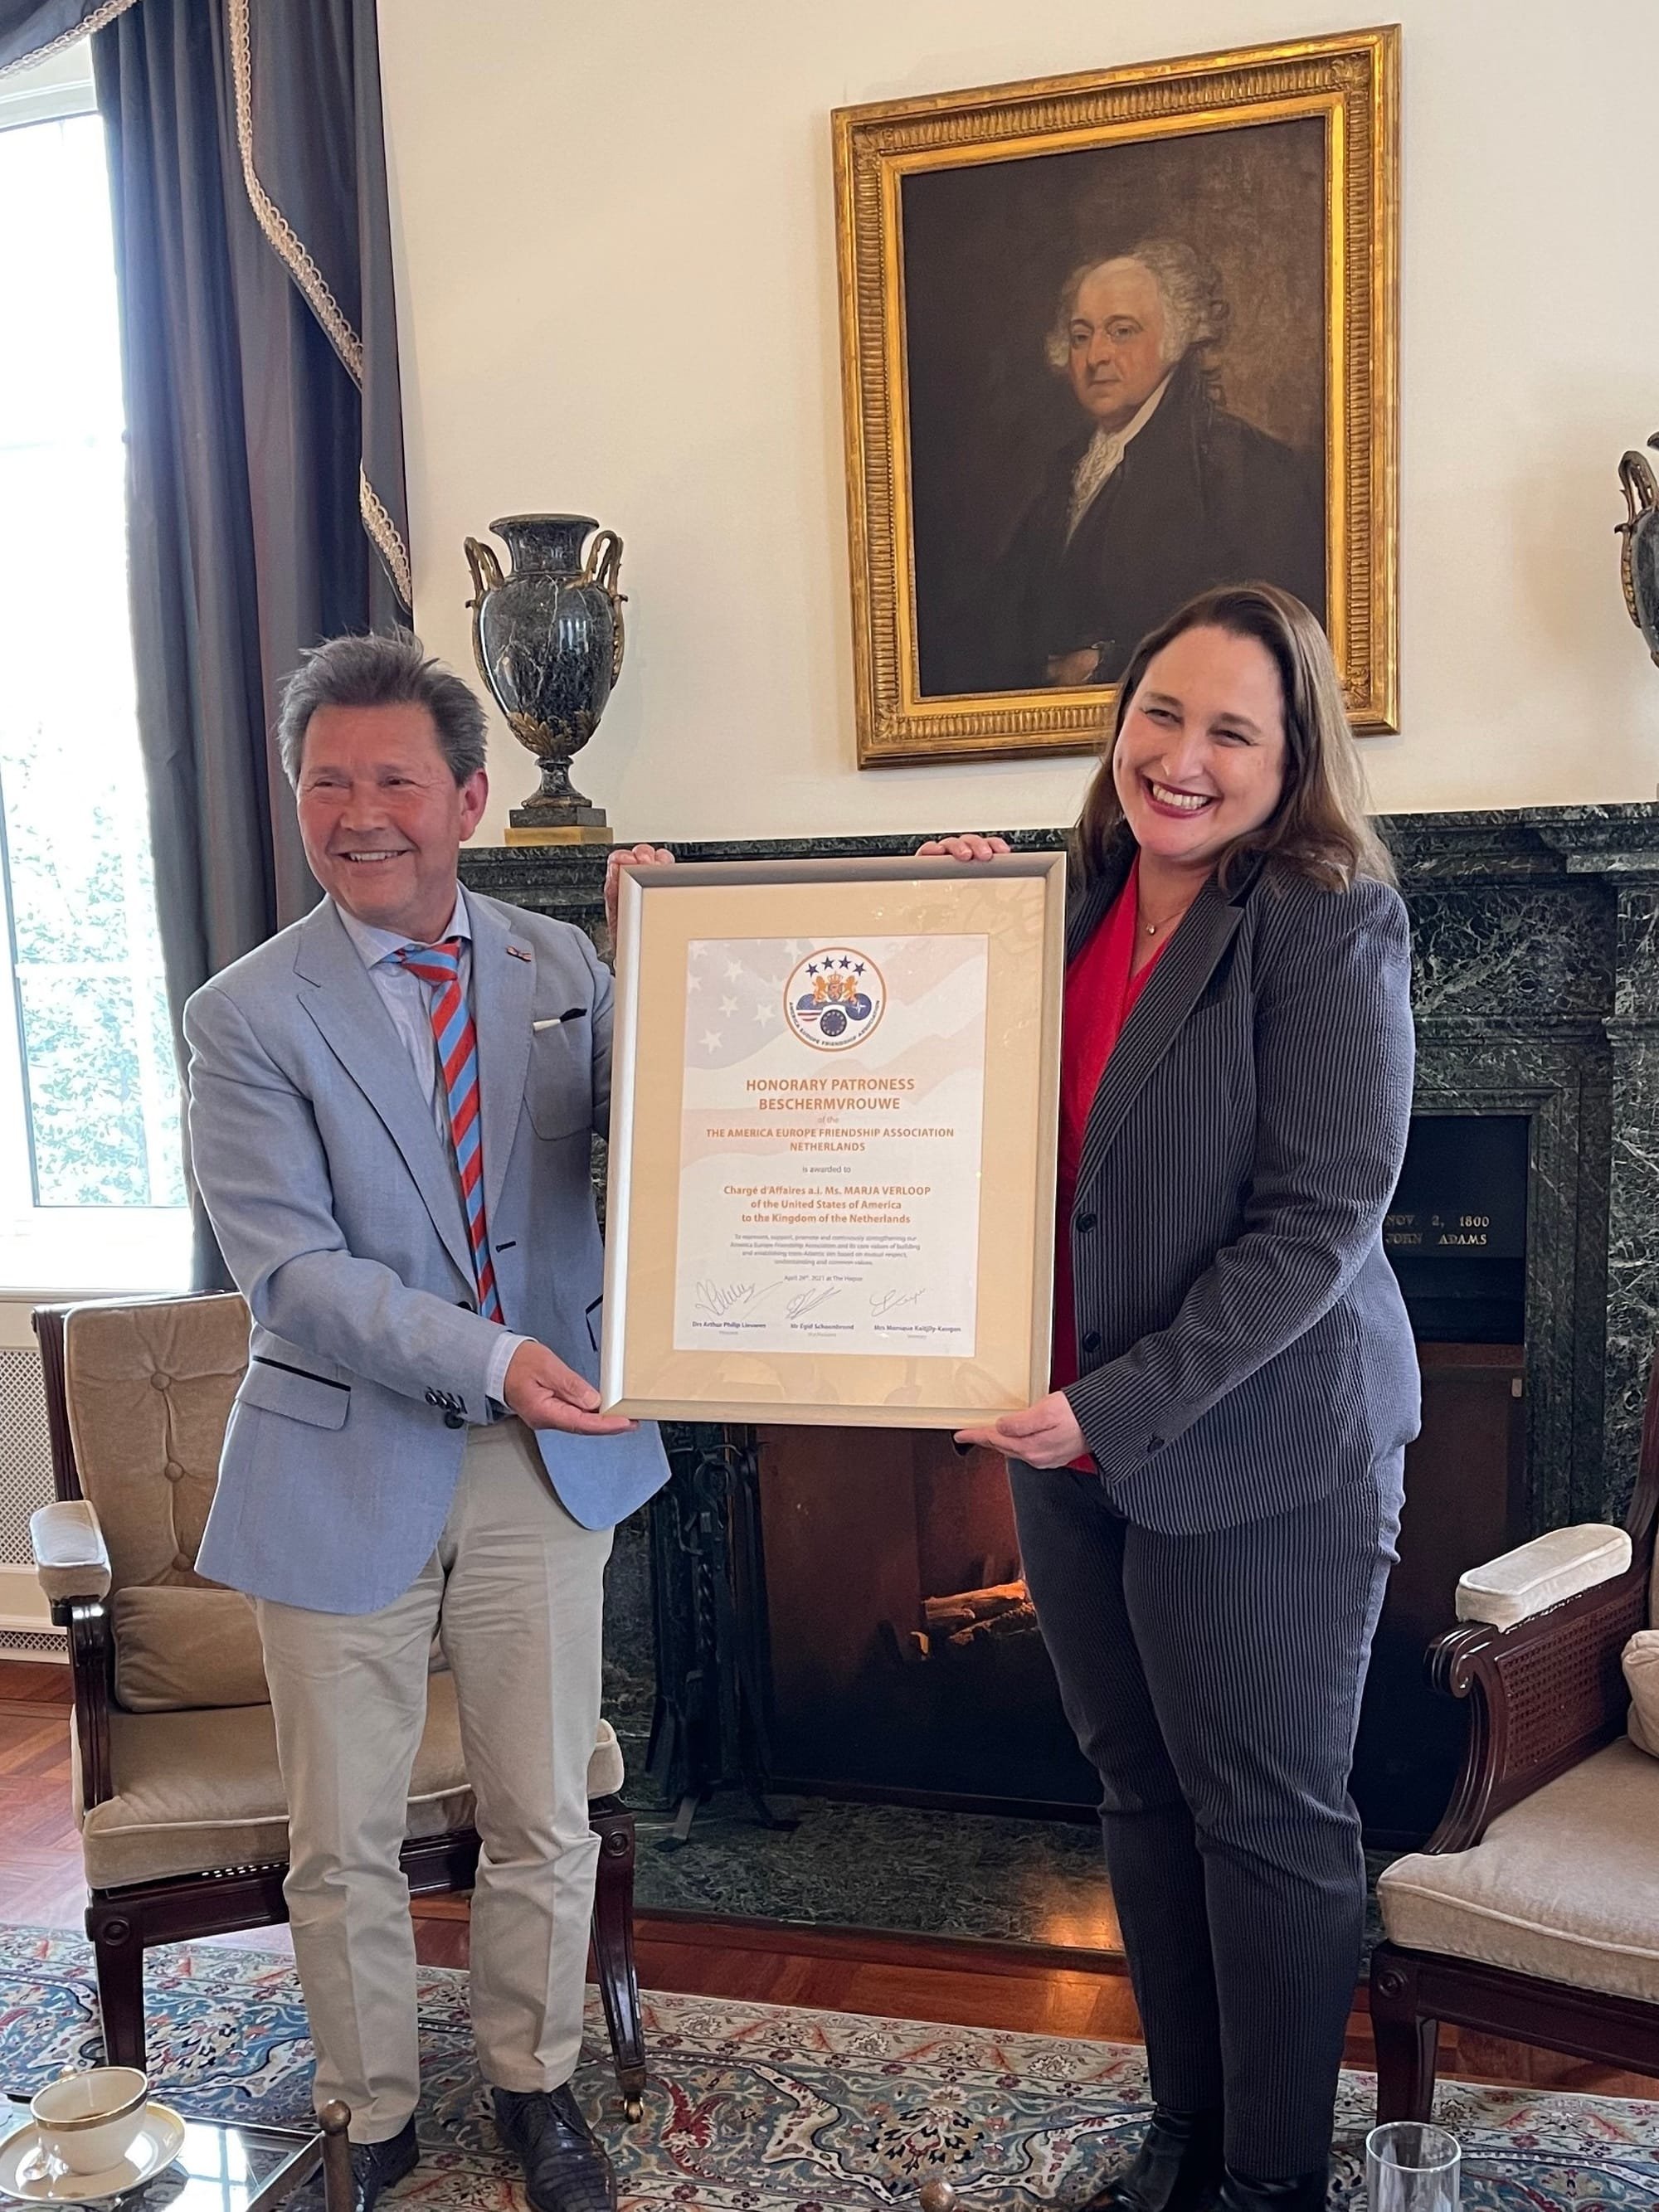 Installation Ceremony of Honorary Patron Ms Marja Verloop, Chargé d’Affaires of the United States of America at the US Ambassador’s Residence at the Hague